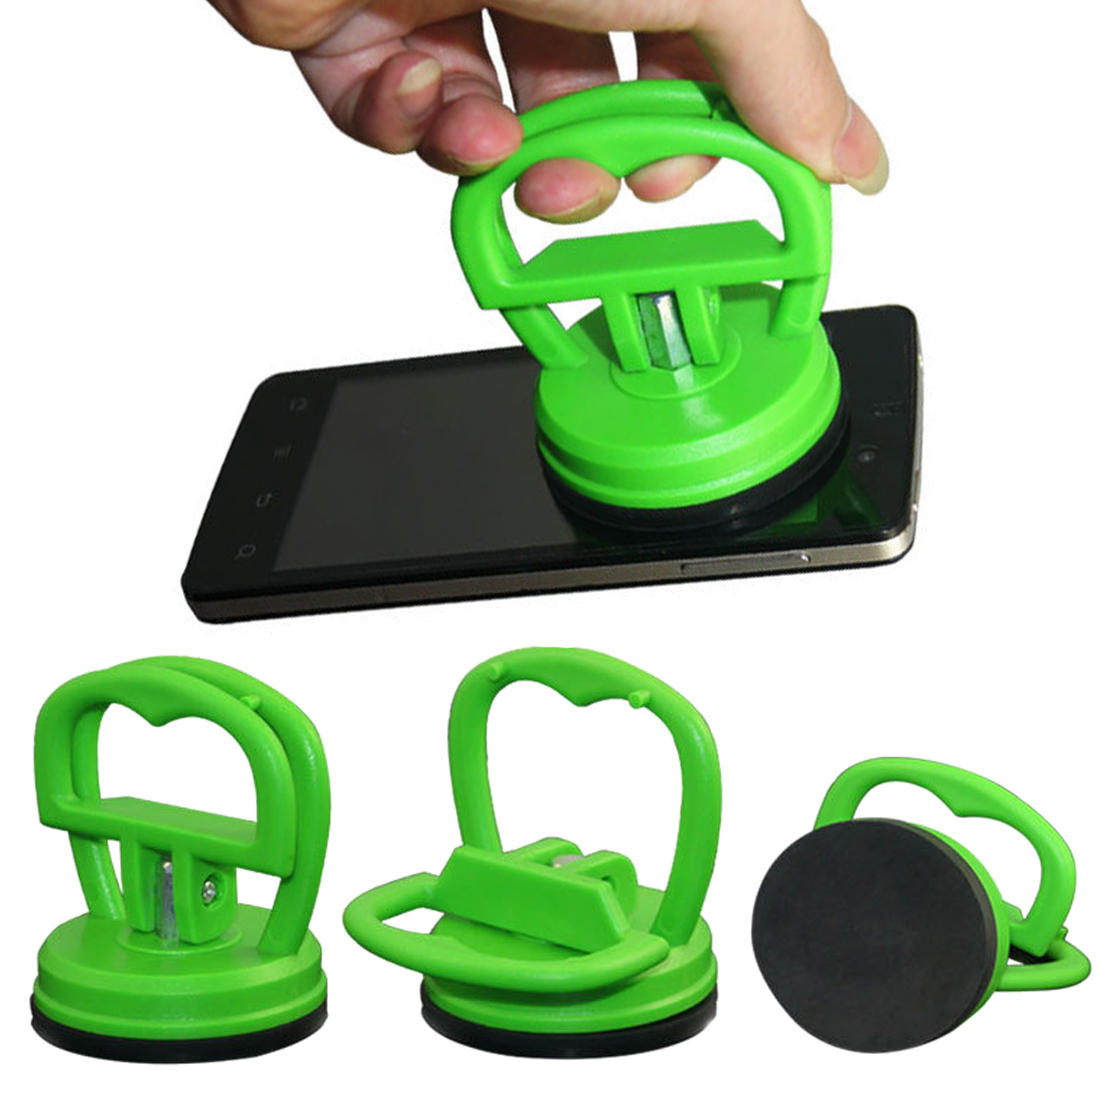 Bakeey Universal Disassembly Heavy Duty Suction Cup Smart Phone Repair Tool for iPhone Cell Phone LC